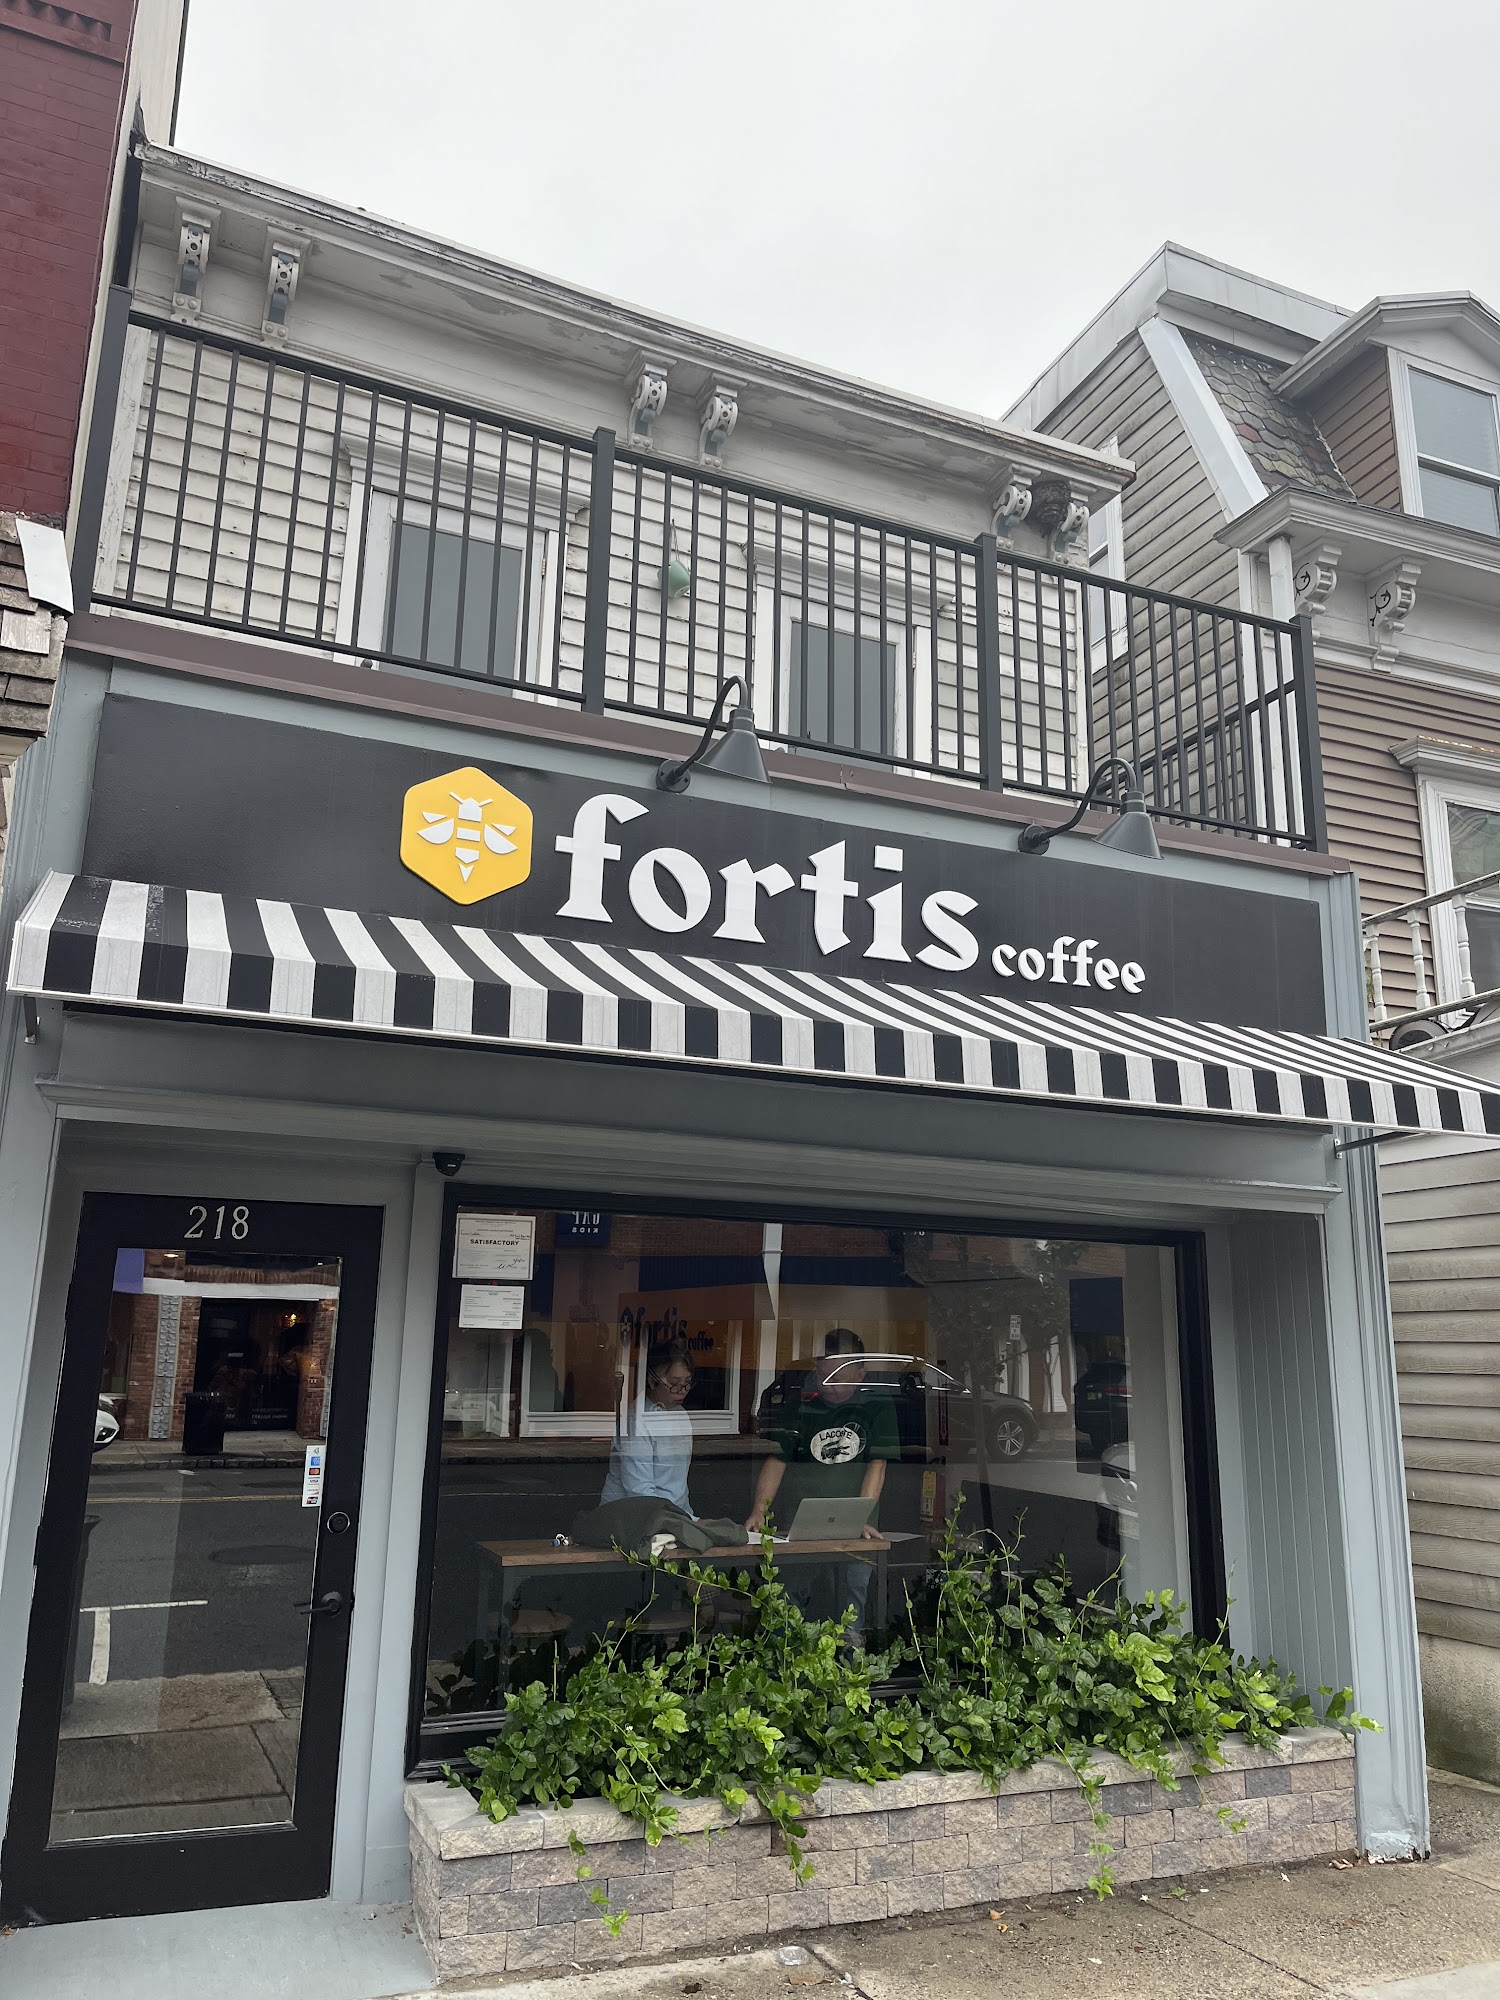 Fortis Coffee